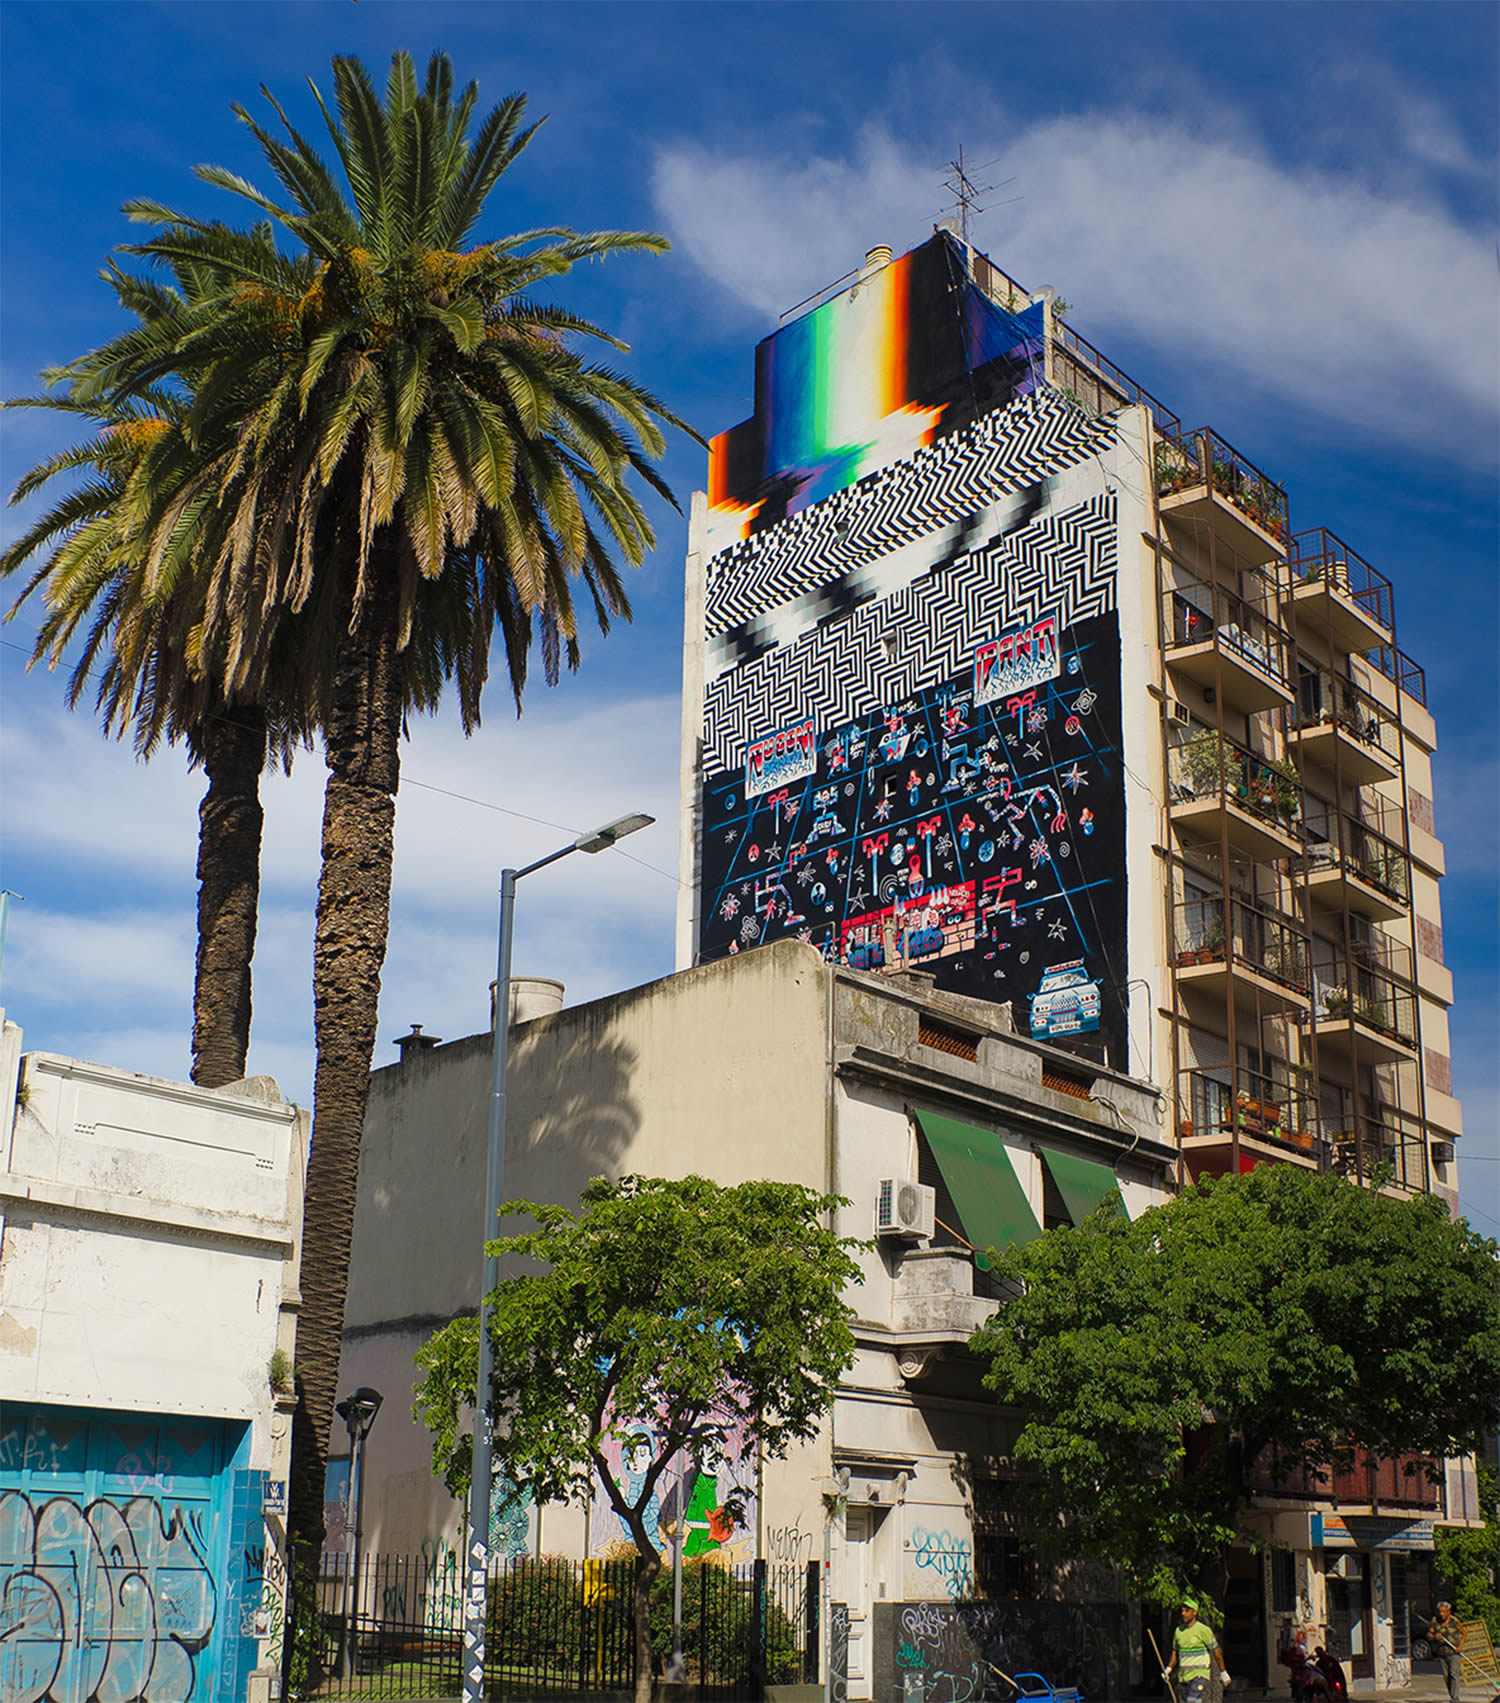 mural on large building in argentina, by pantone f